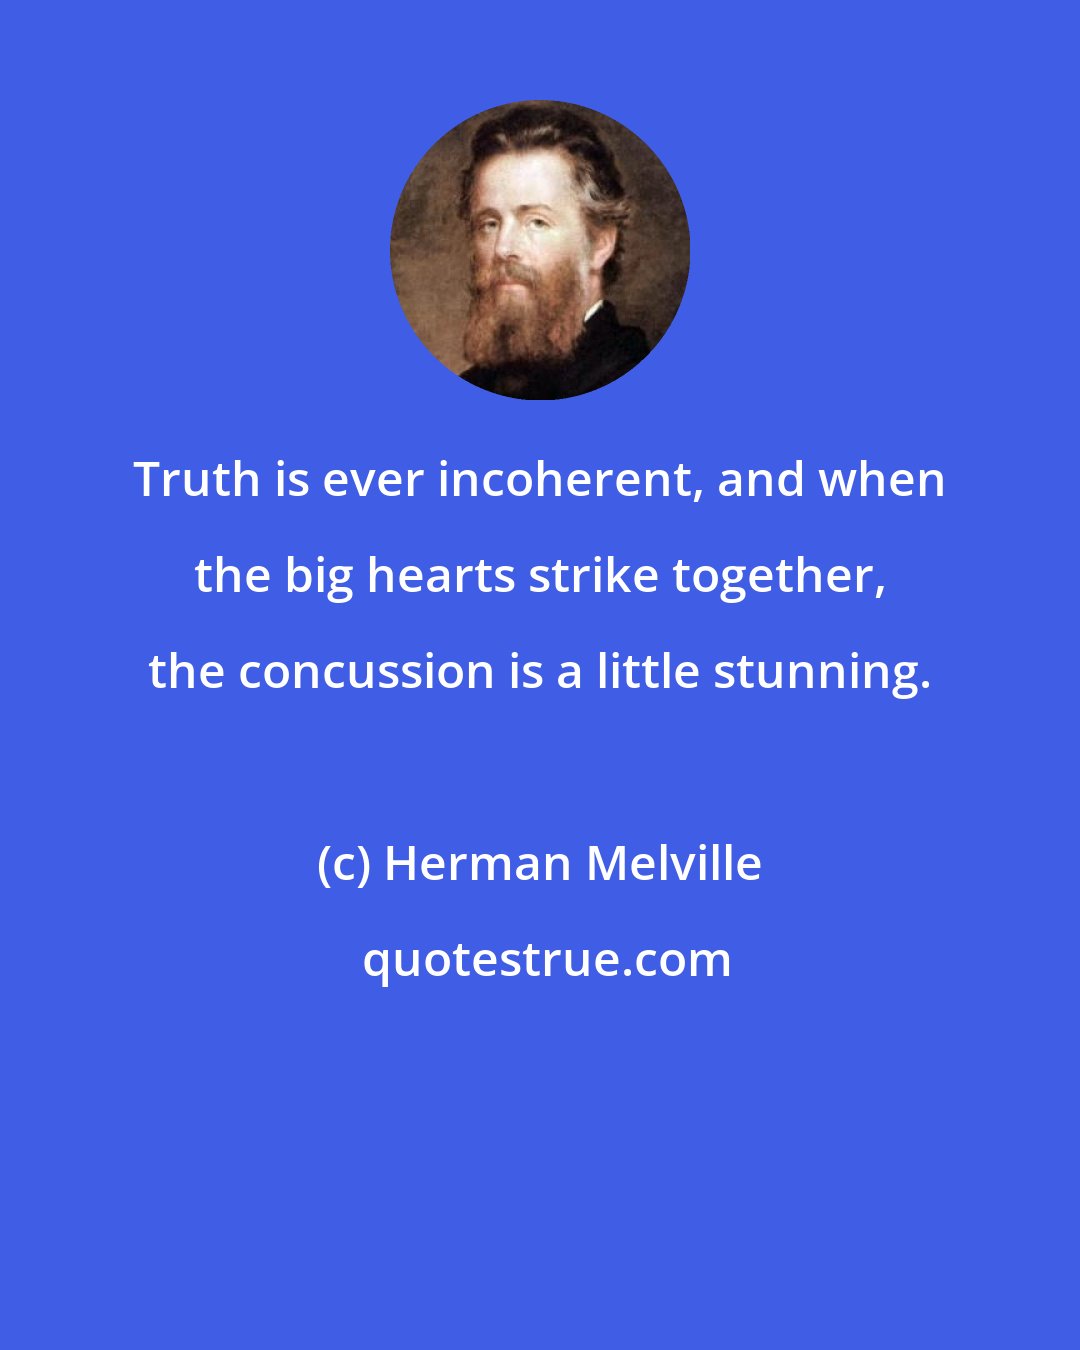 Herman Melville: Truth is ever incoherent, and when the big hearts strike together, the concussion is a little stunning.